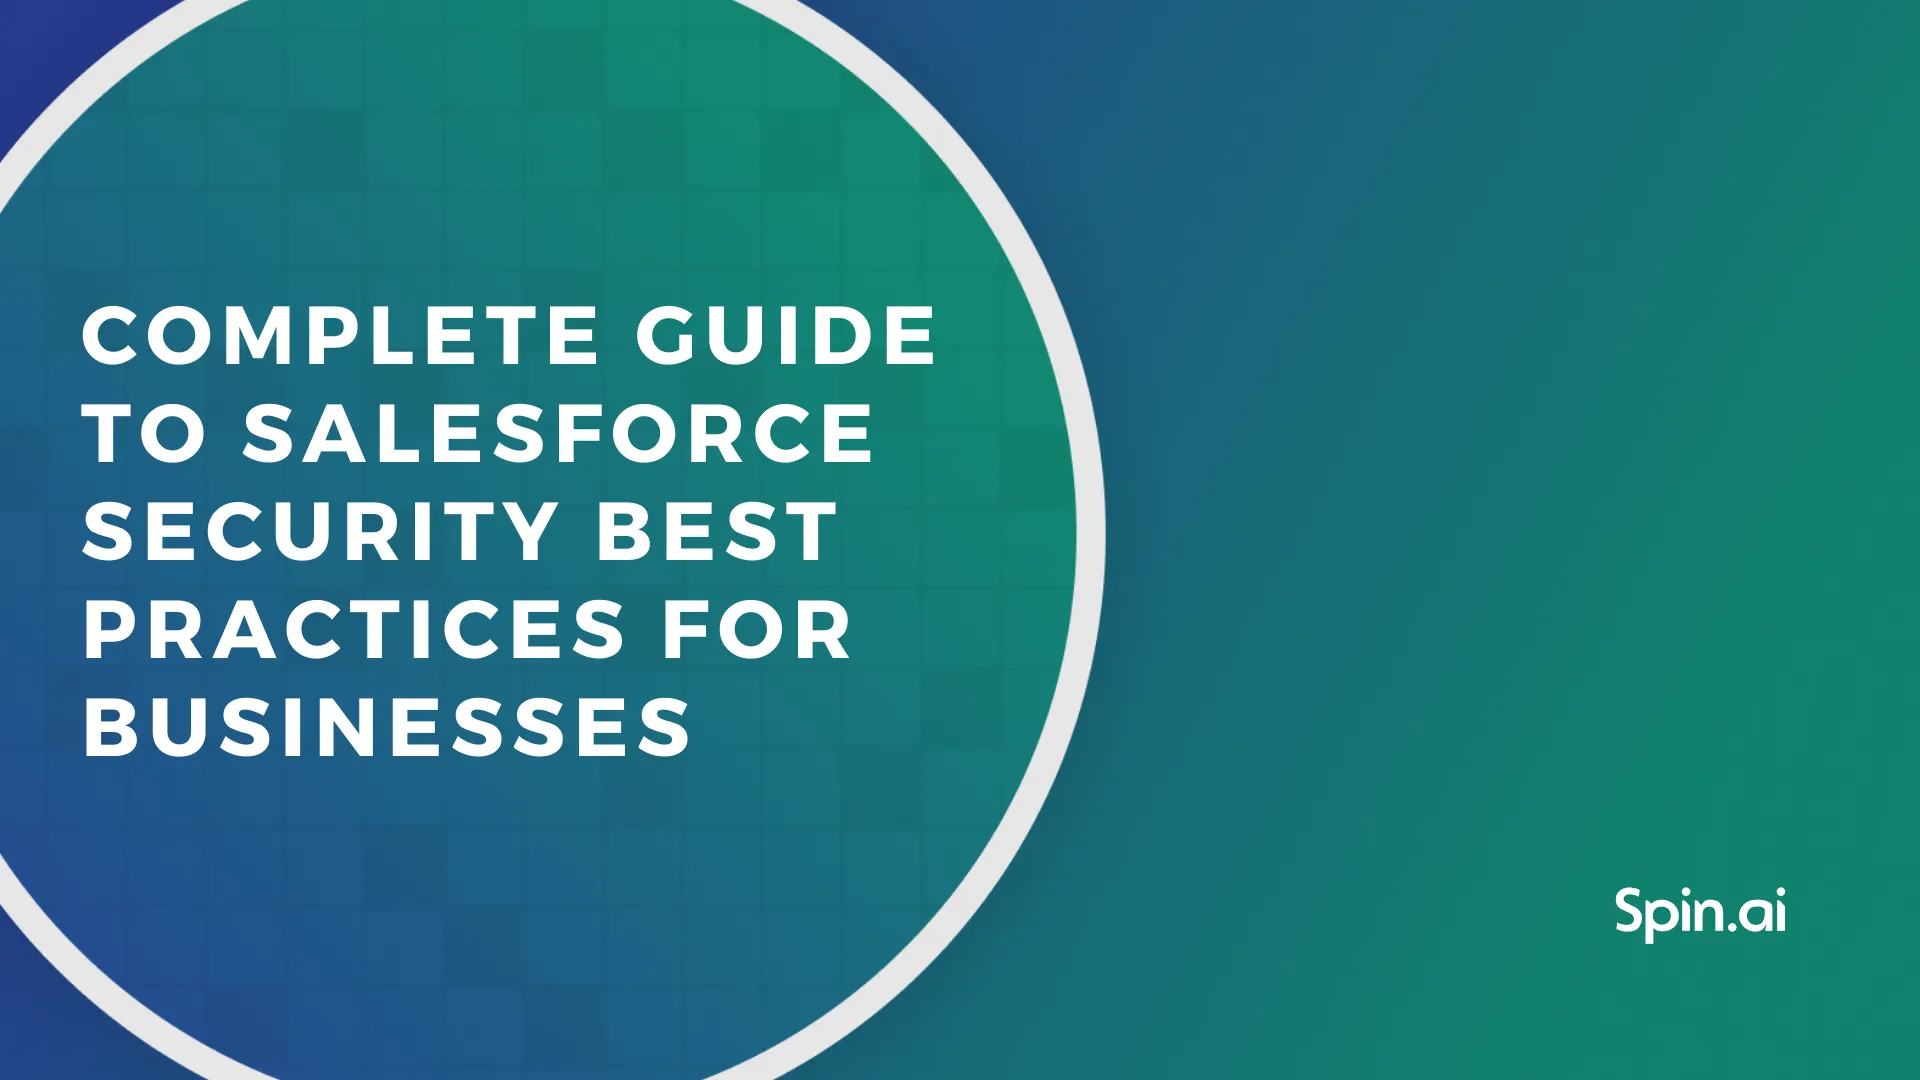 Complete Guide to Salesforce Security Best Practices for Businesses